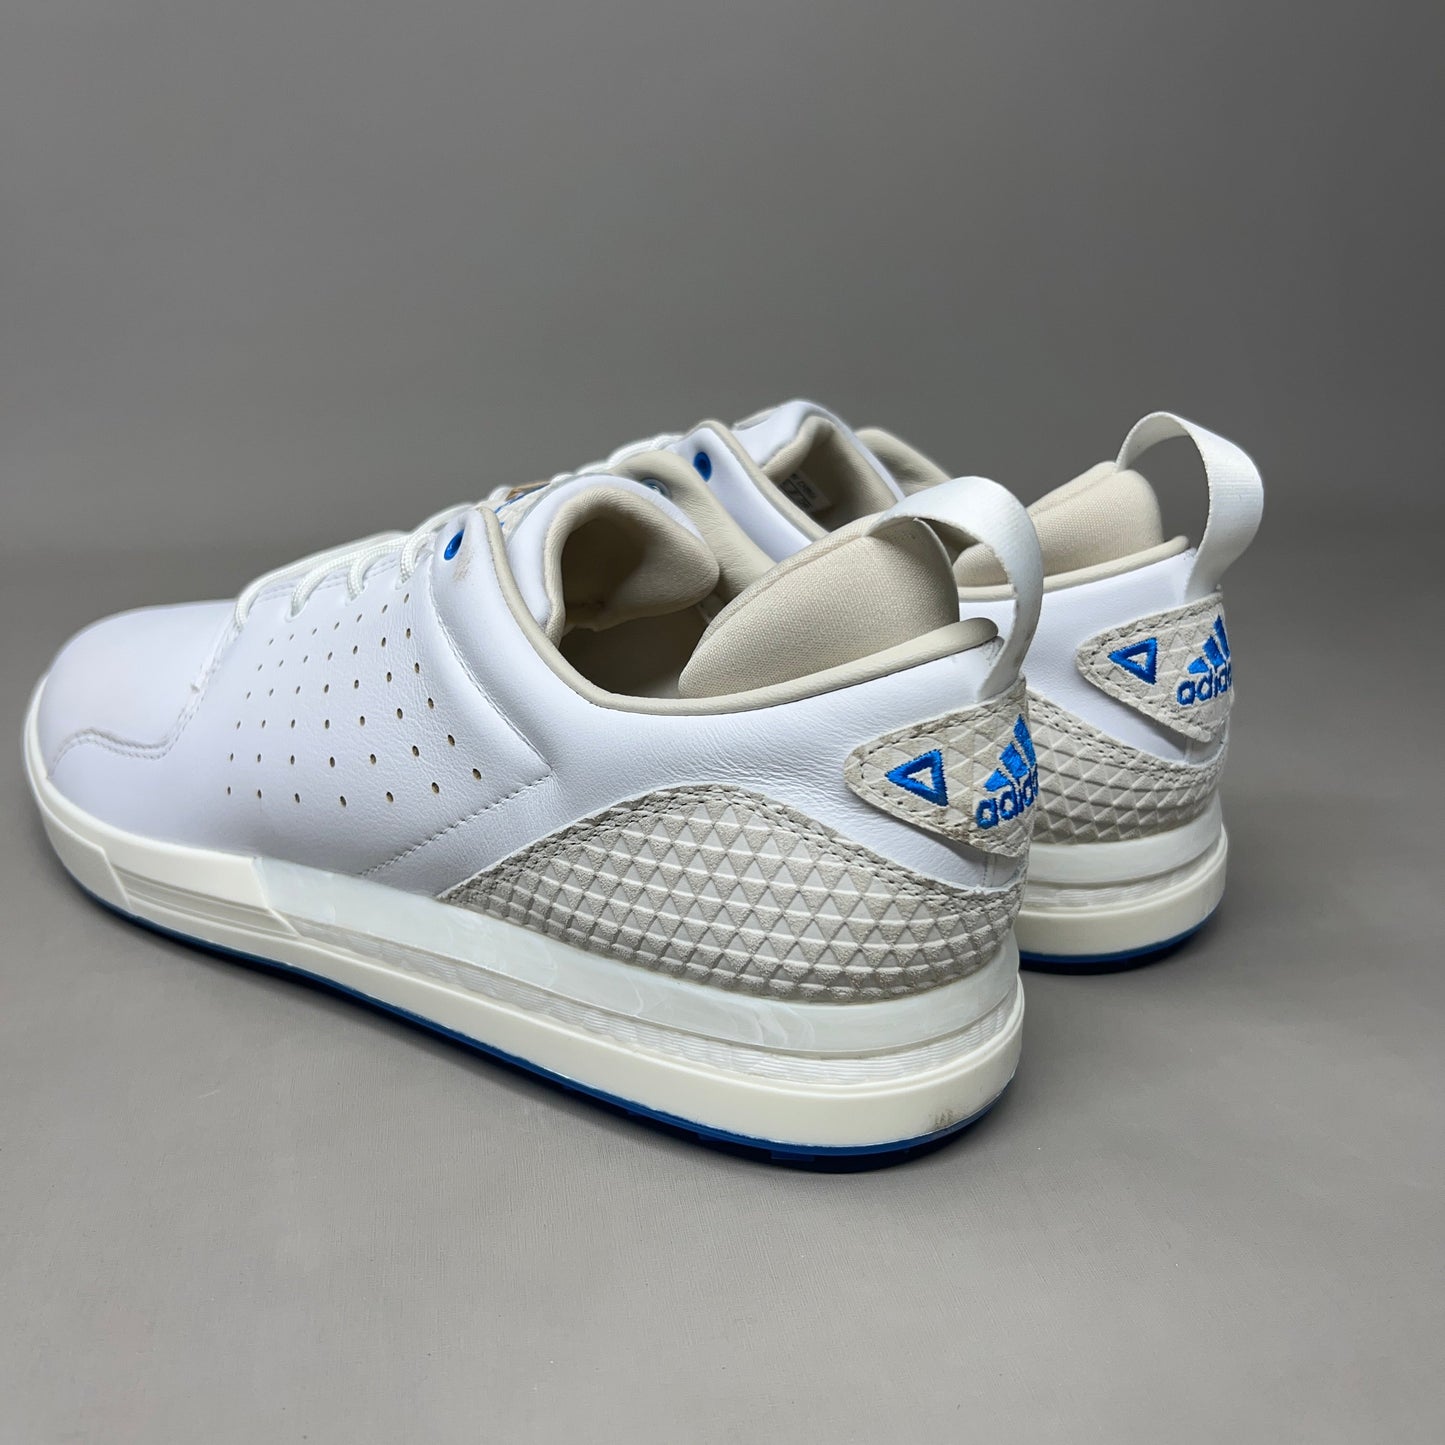 ADIDAS Flopshot Golf Shoes Waterproof Leather Men's Sz 9.5 White / Gold / Blue GV9668 (New)